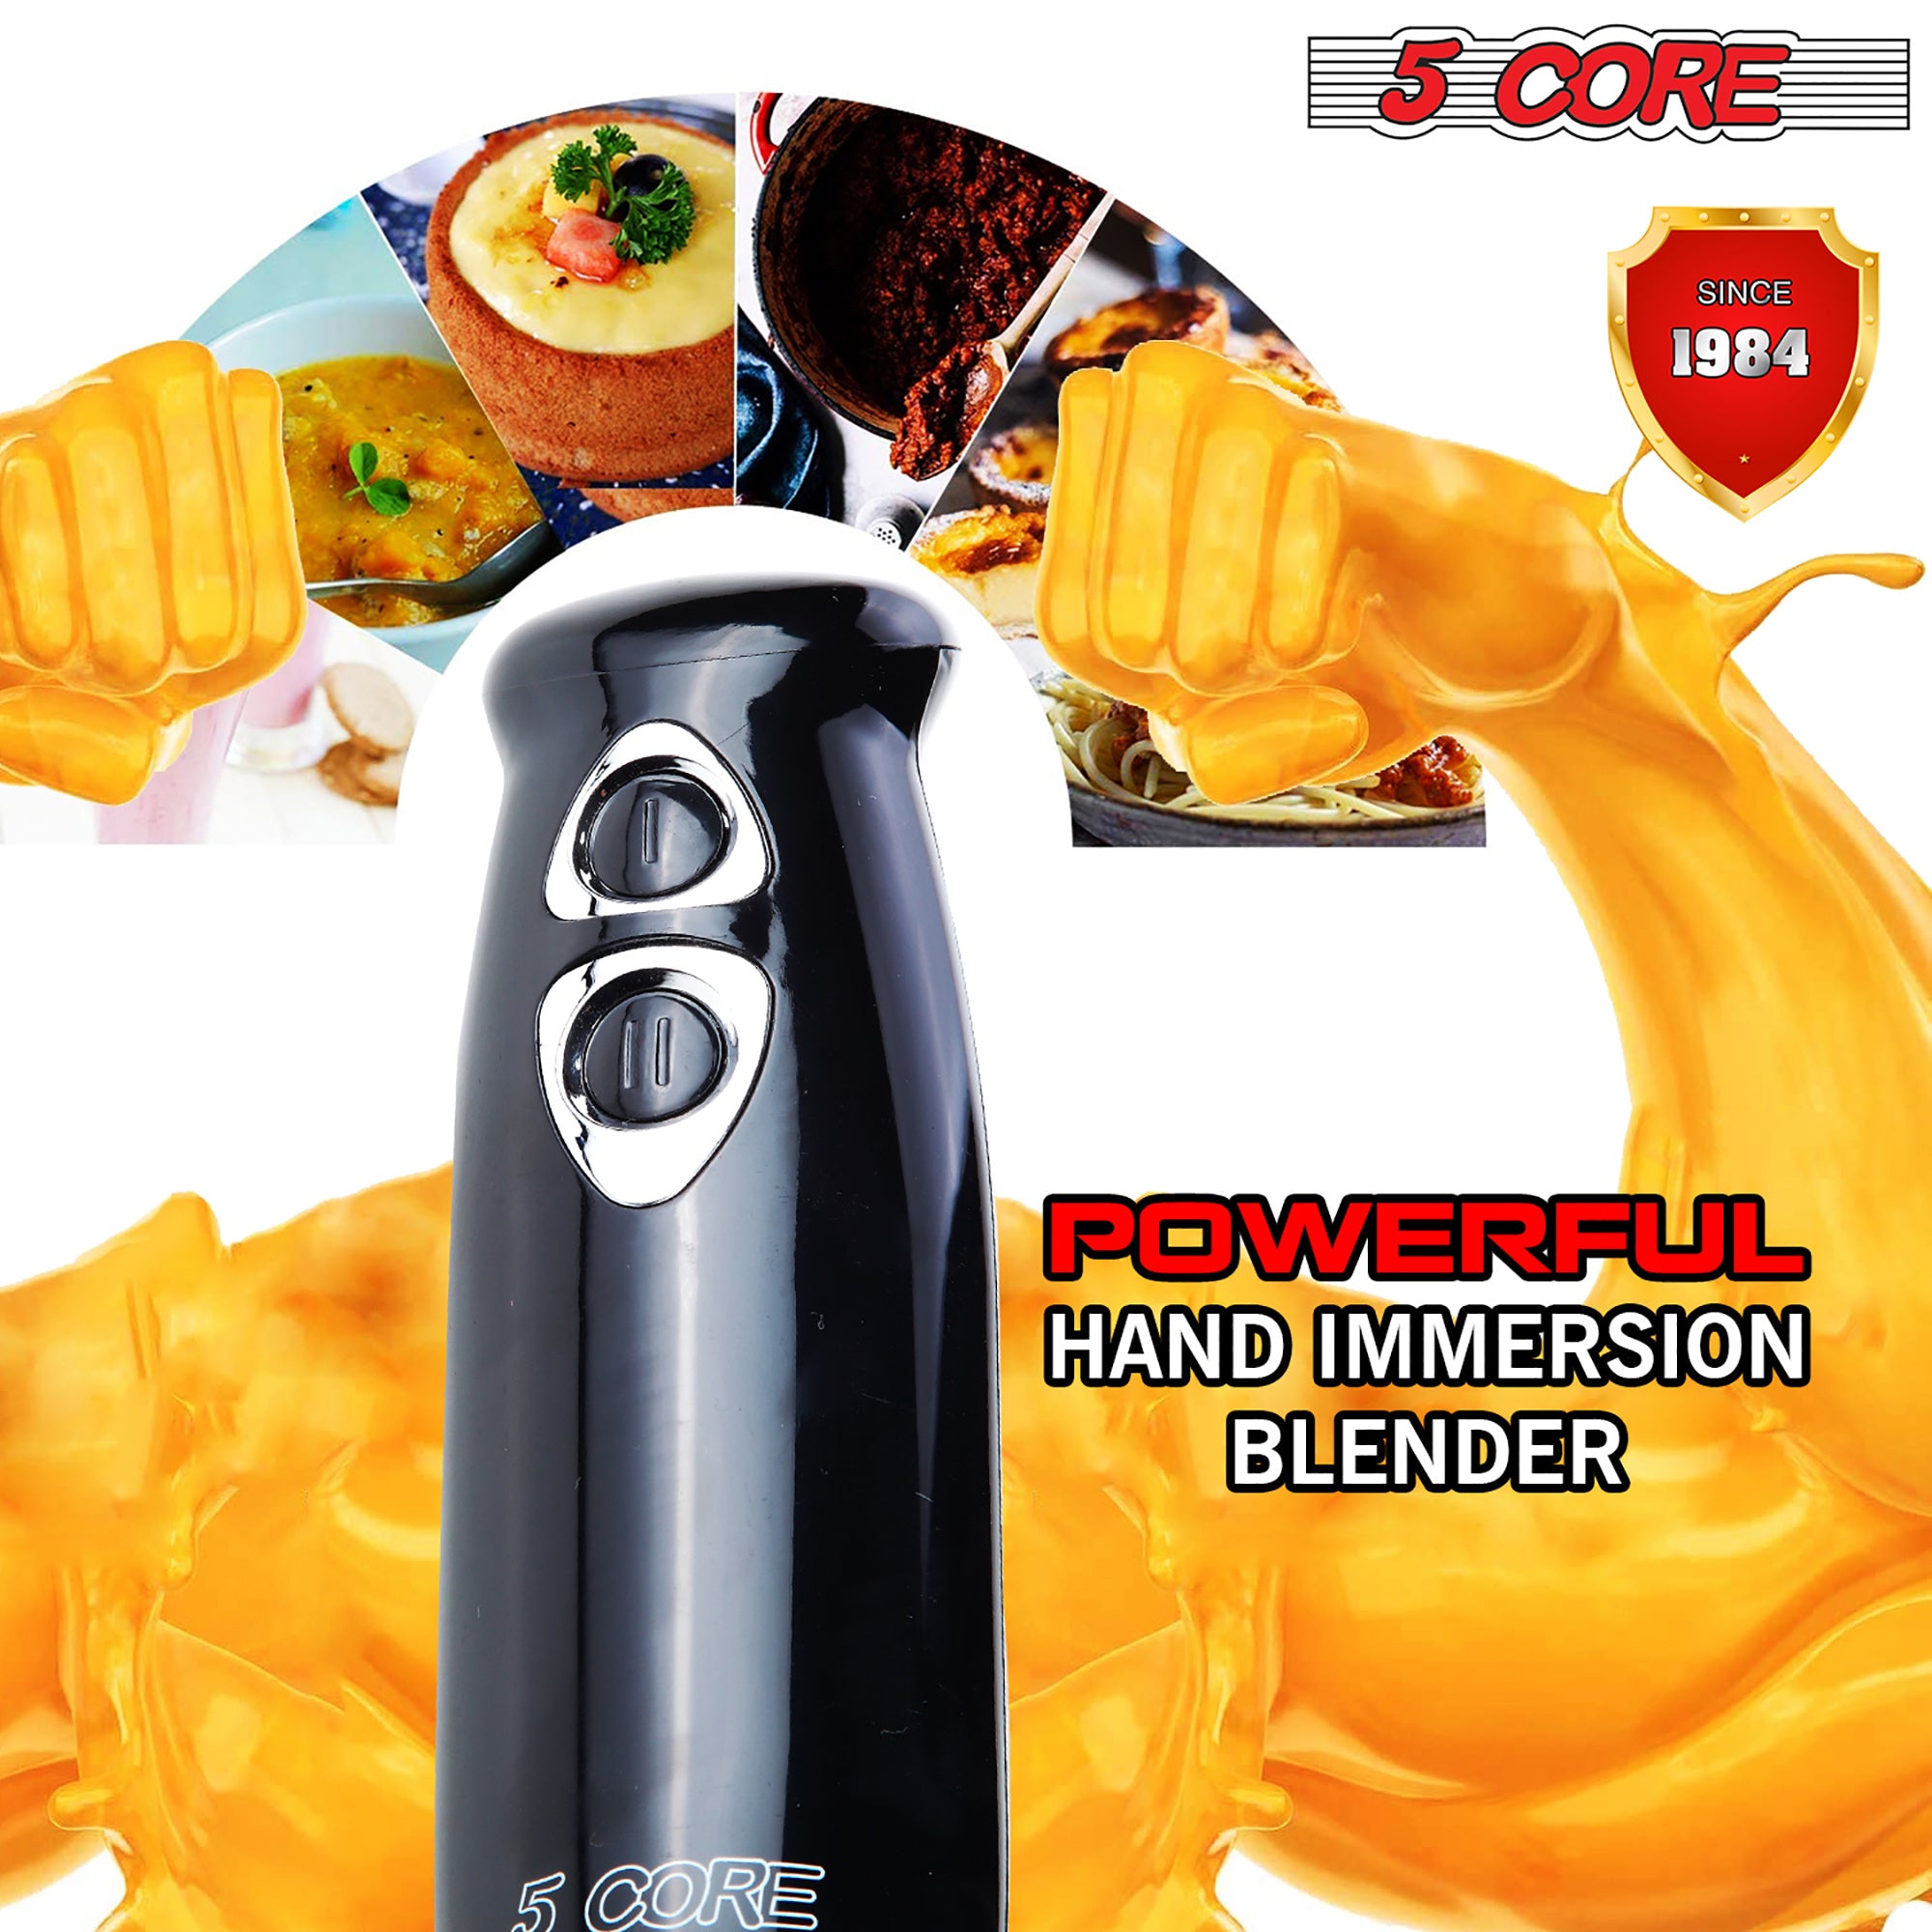 A Hand Blender Immersion Blender Handheld Stick Batidora Electric Blenders Emersion Hand Mixer For Kitchen 5 Core HB 1510 BLK surrounded by fruit, featuring stainless steel blades.